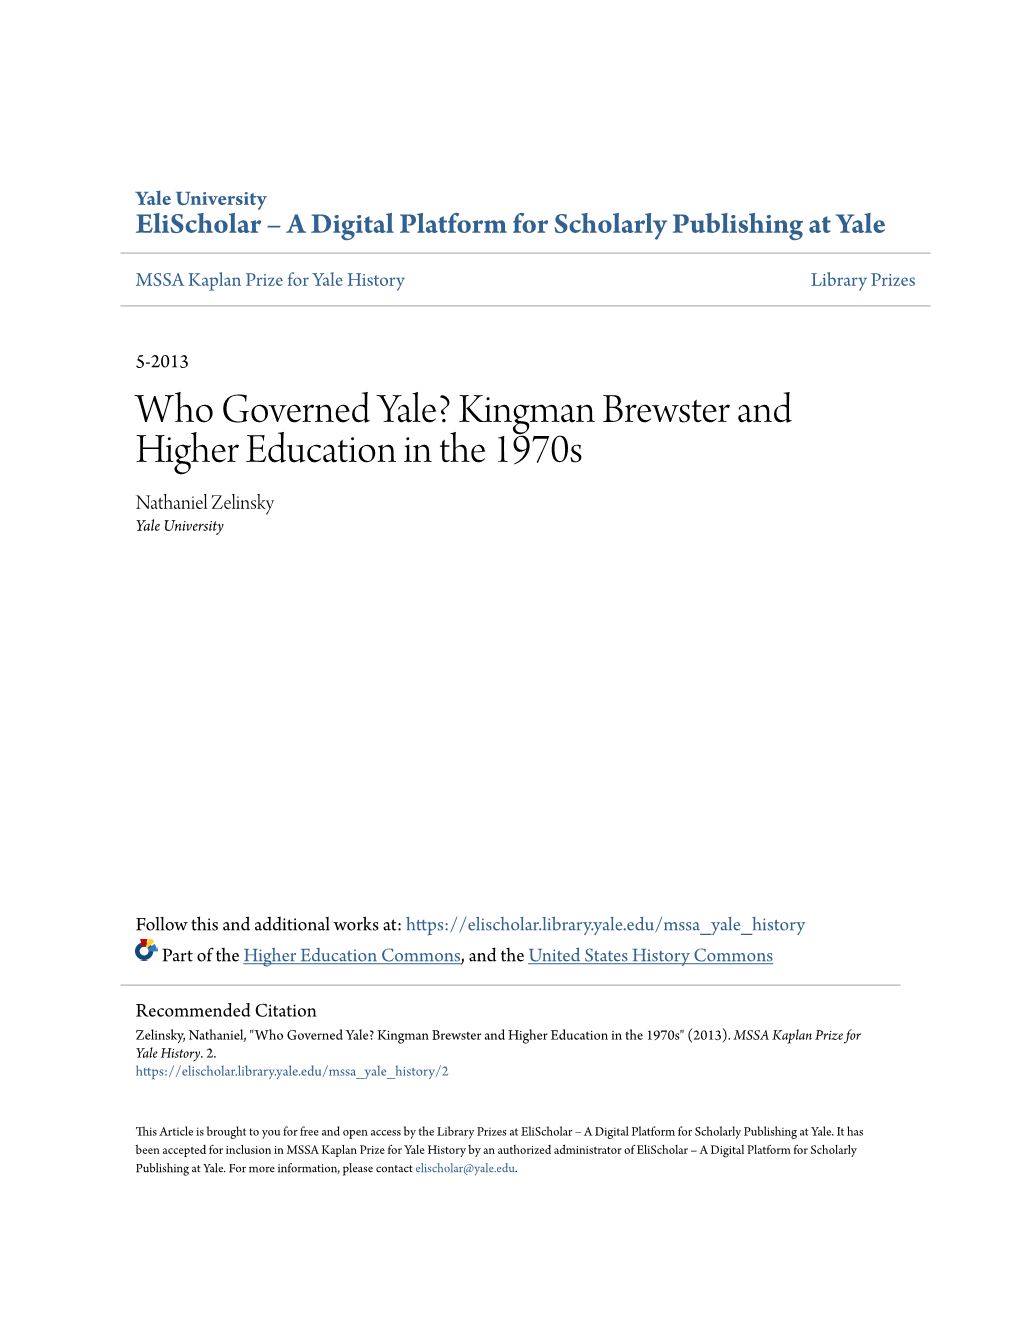 Kingman Brewster and Higher Education in the 1970S Nathaniel Zelinsky Yale University